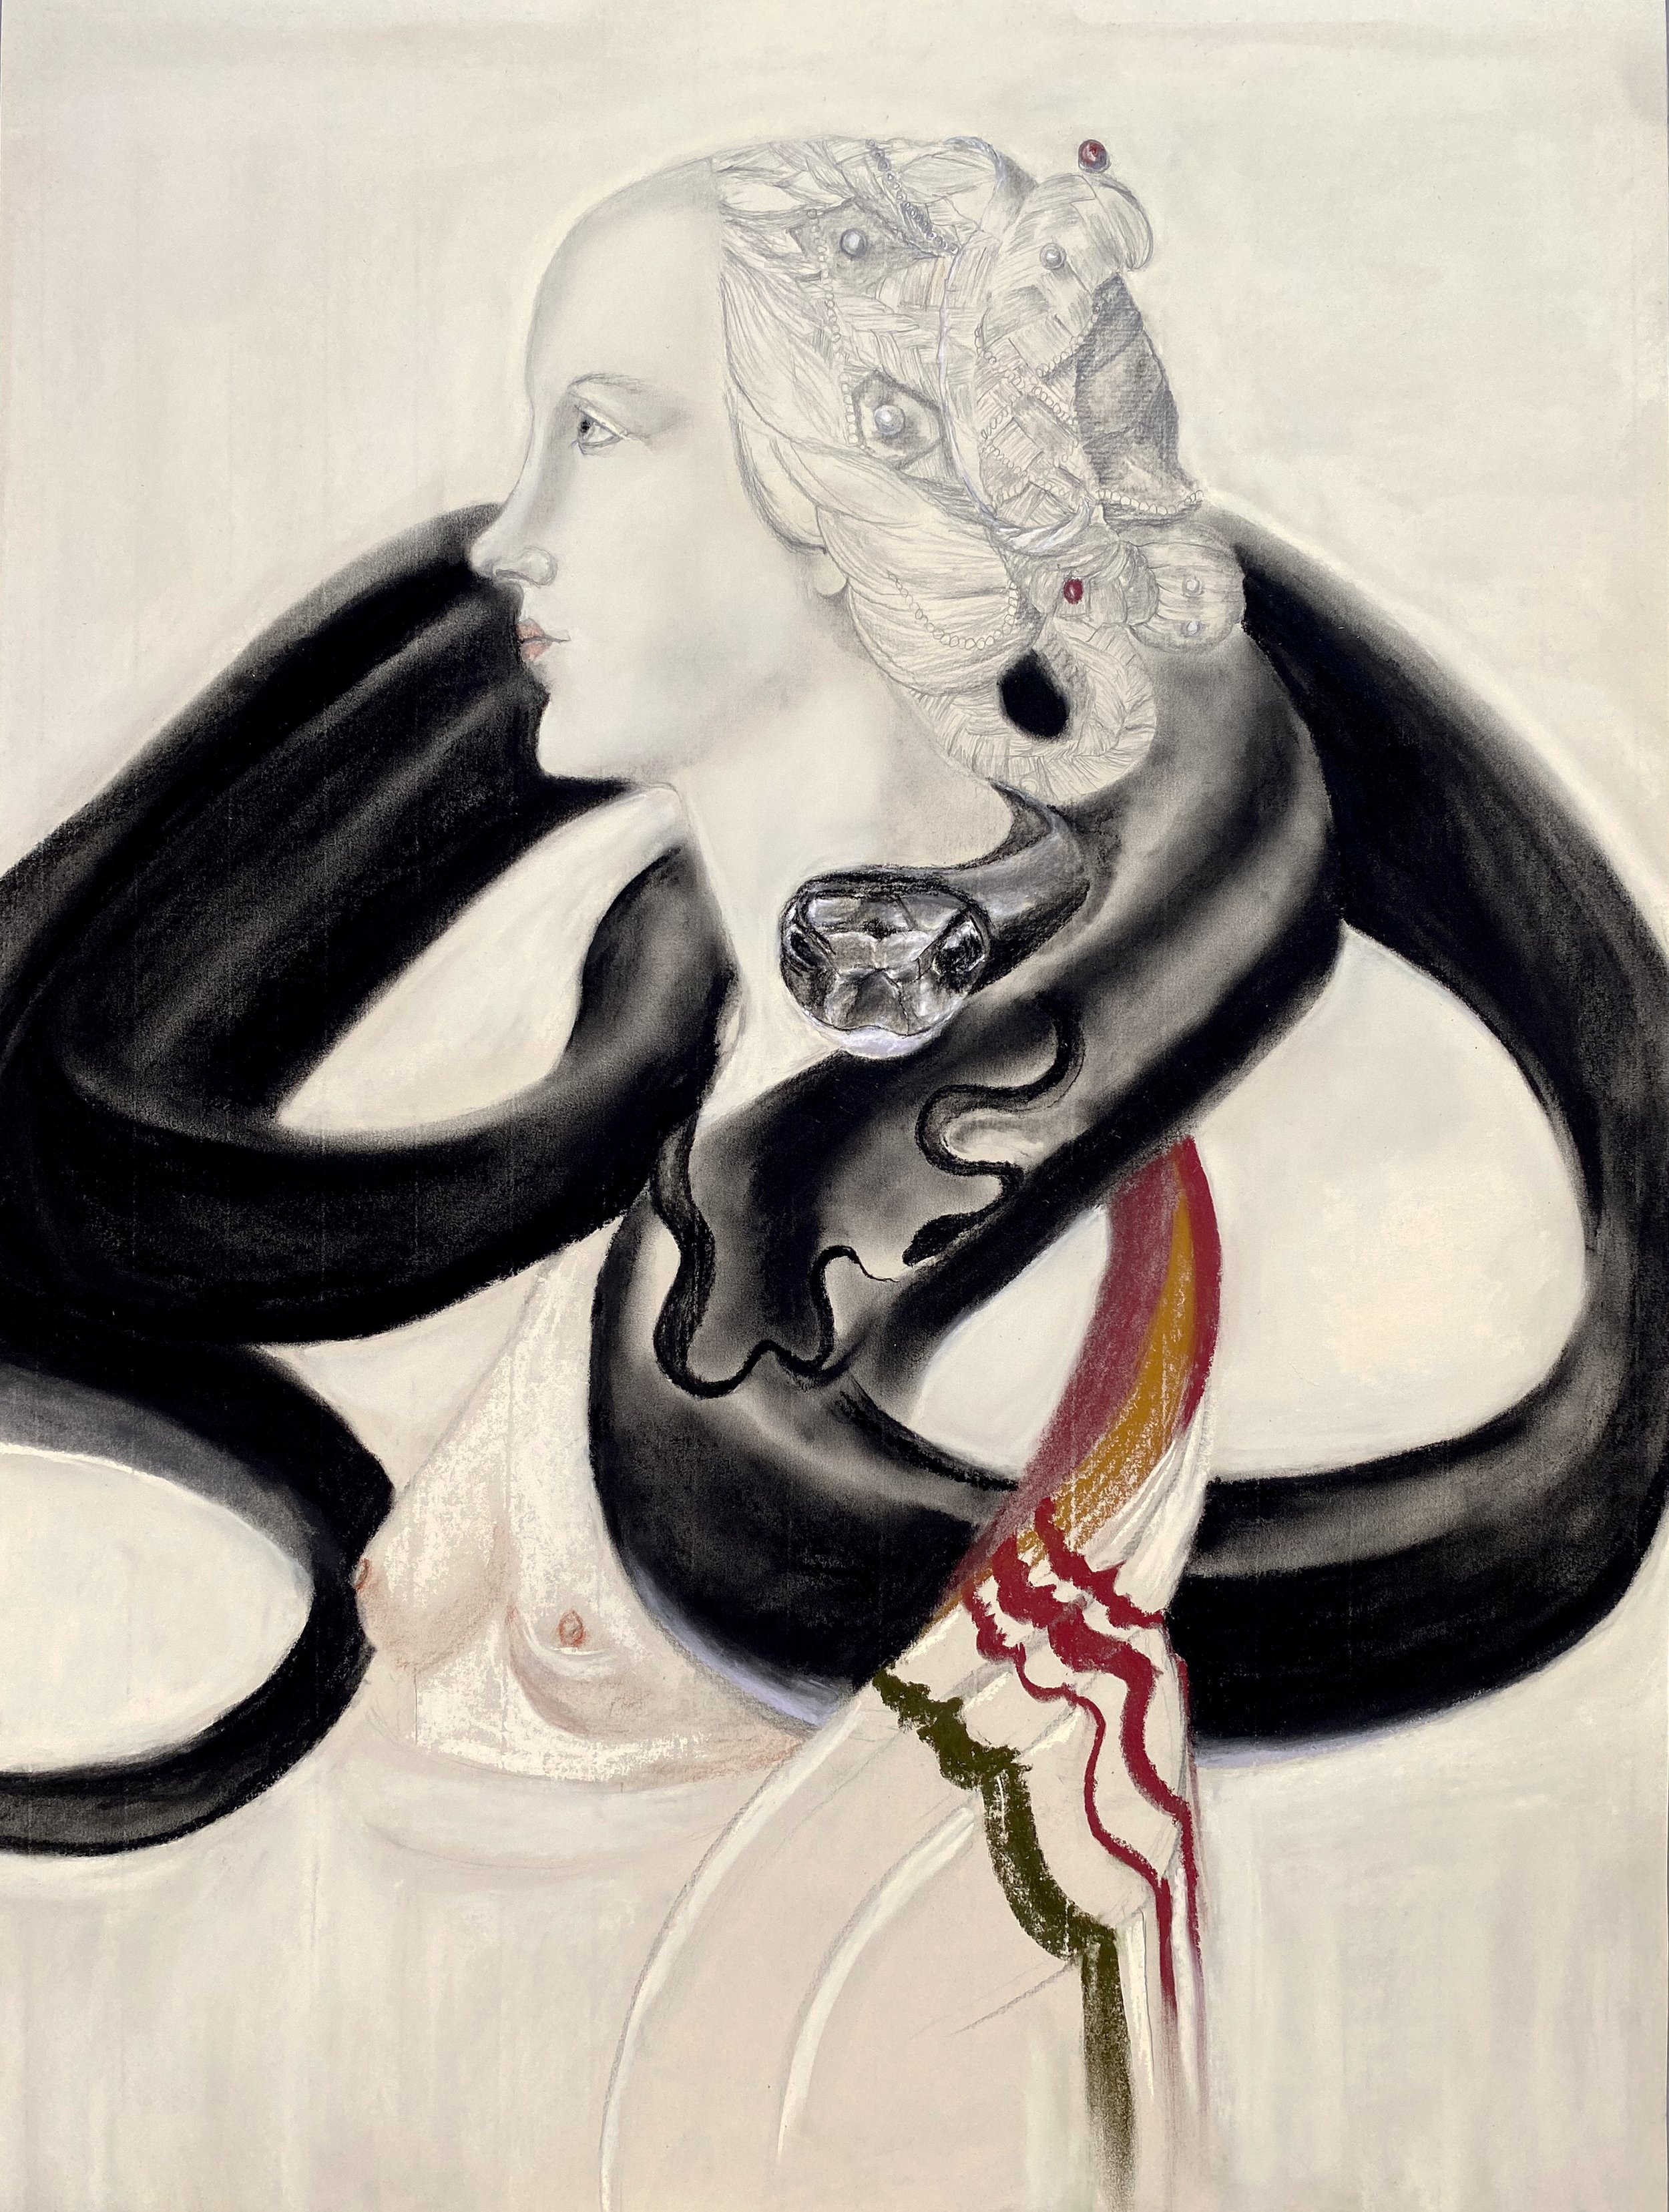    Study for Elegant Black Racer Snake Swirls Through its Mini Me, Simonetta Vespucci’s Cleopatra Prop, to Face Out     chalk pastel and graphite on paper  18 x 24 inches  2023  &nbsp;  I’m sunning at the edge of the uneven grey stones where they for